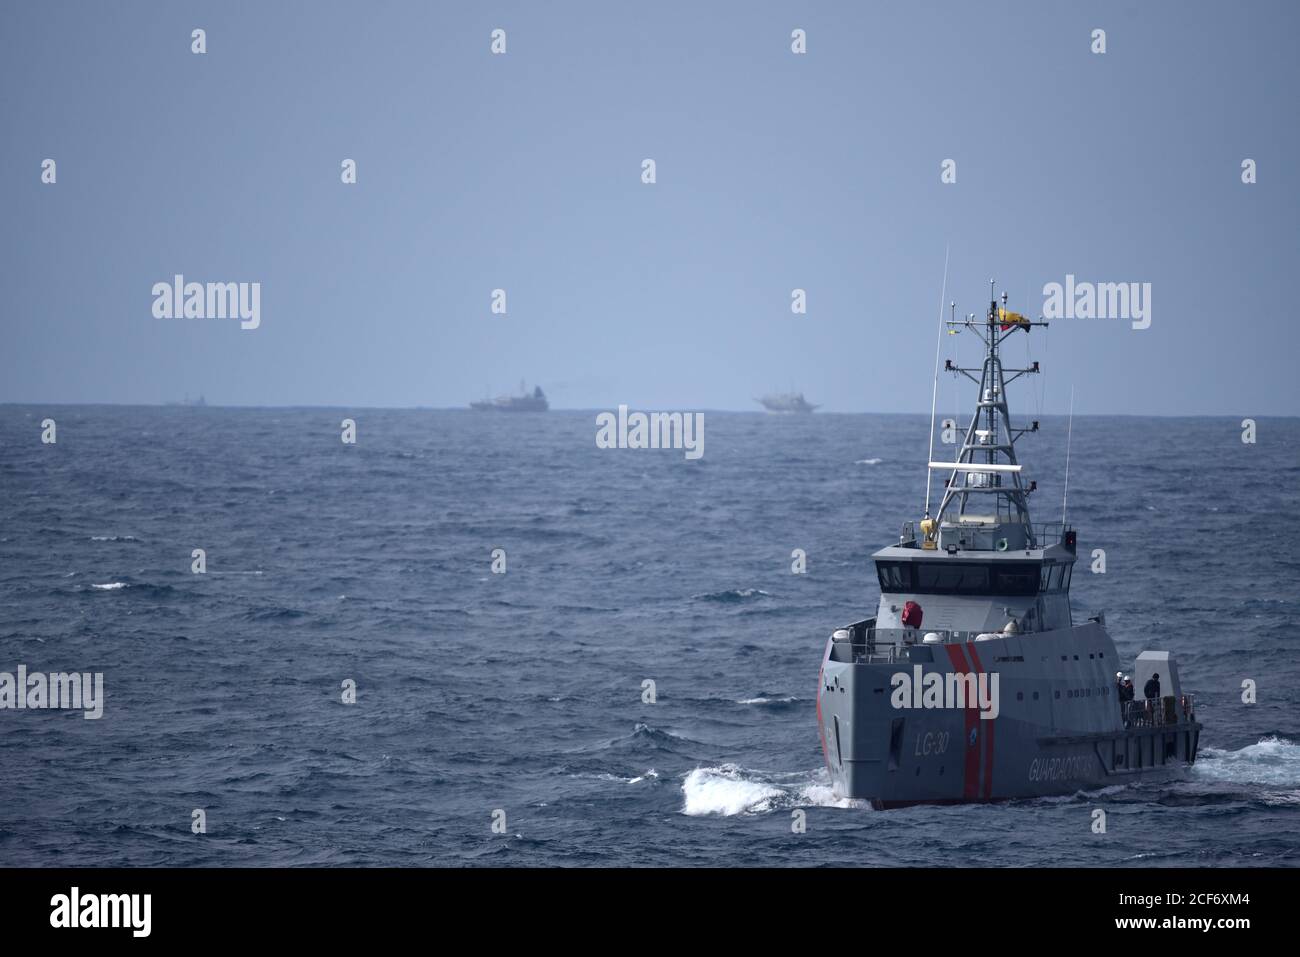 The Ecuadorian naval vessel LAE Isla San Cristobal (LG 30) sails toward the Coast Guard Cutter Bertholf (WMSL 750) while conducting a joint patrol to detect and deter potential Illegal, Unreported, and Unregulated (IUU) fishing in the vicinity of the Galapagos Islands, Aug. 28, 2020. From Aug. 25-29, Bertholf patrolled over 3,000 square nautical miles of Ecuadorian and international waters and conducted joint operations with the LAE Isla San Cristobal, providing persistent presence and surveillance of fishing activity throughout the region. U.S. Coast Guard photo. Stock Photo